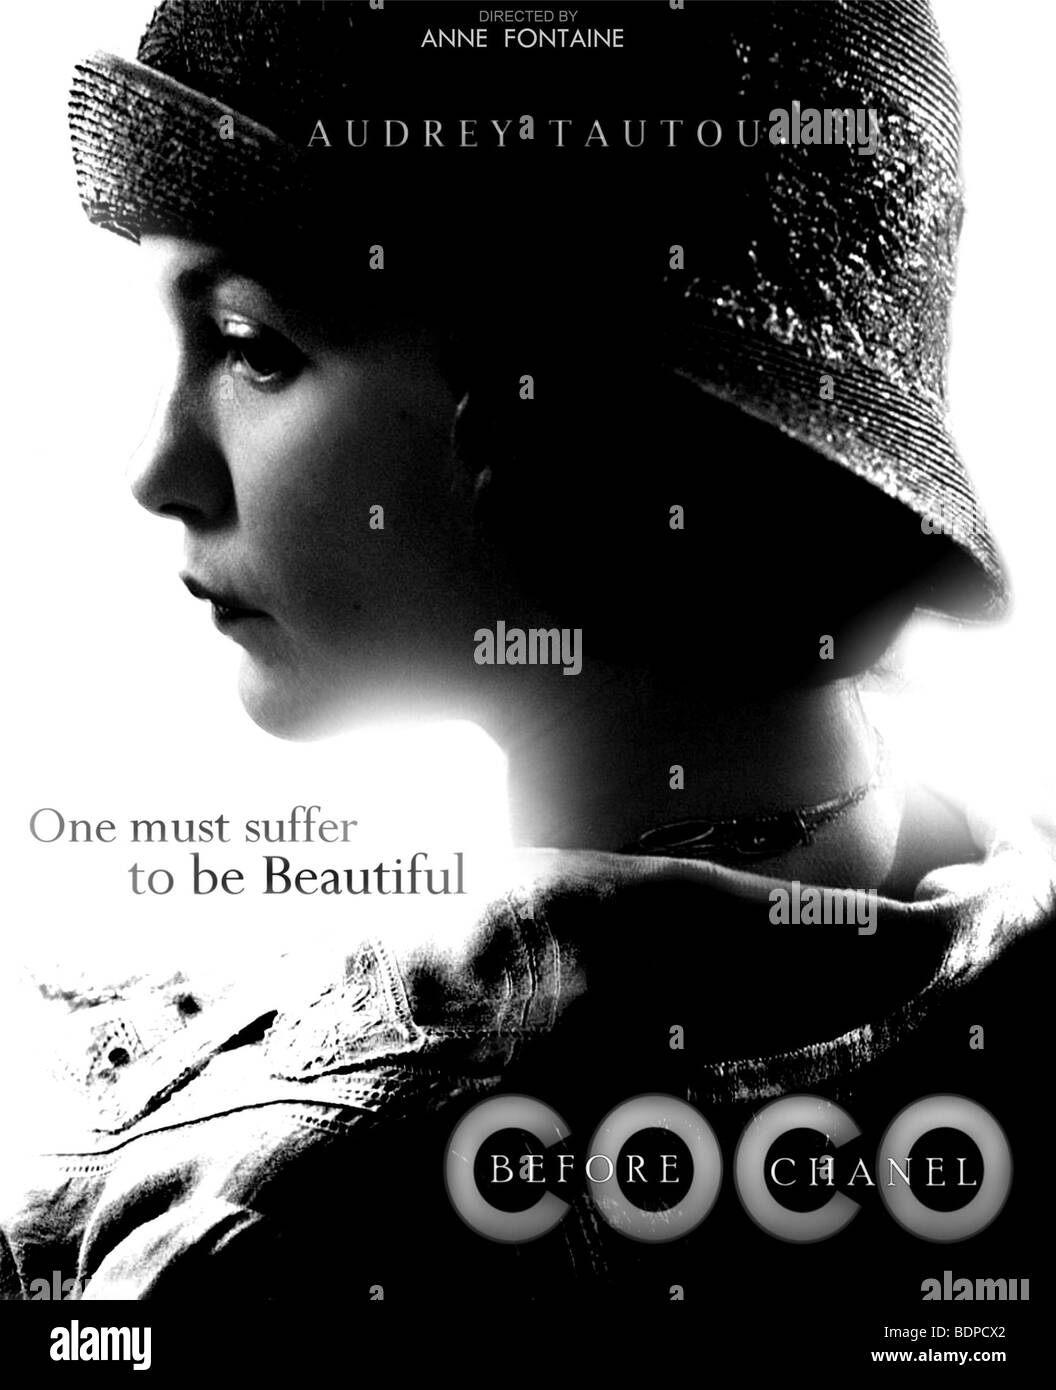 Coco avant Chanel Coco before Chanel Year : 2009 Director : Anne Fontaine Audrey Tautou Movie poster (USA) Stock Photo